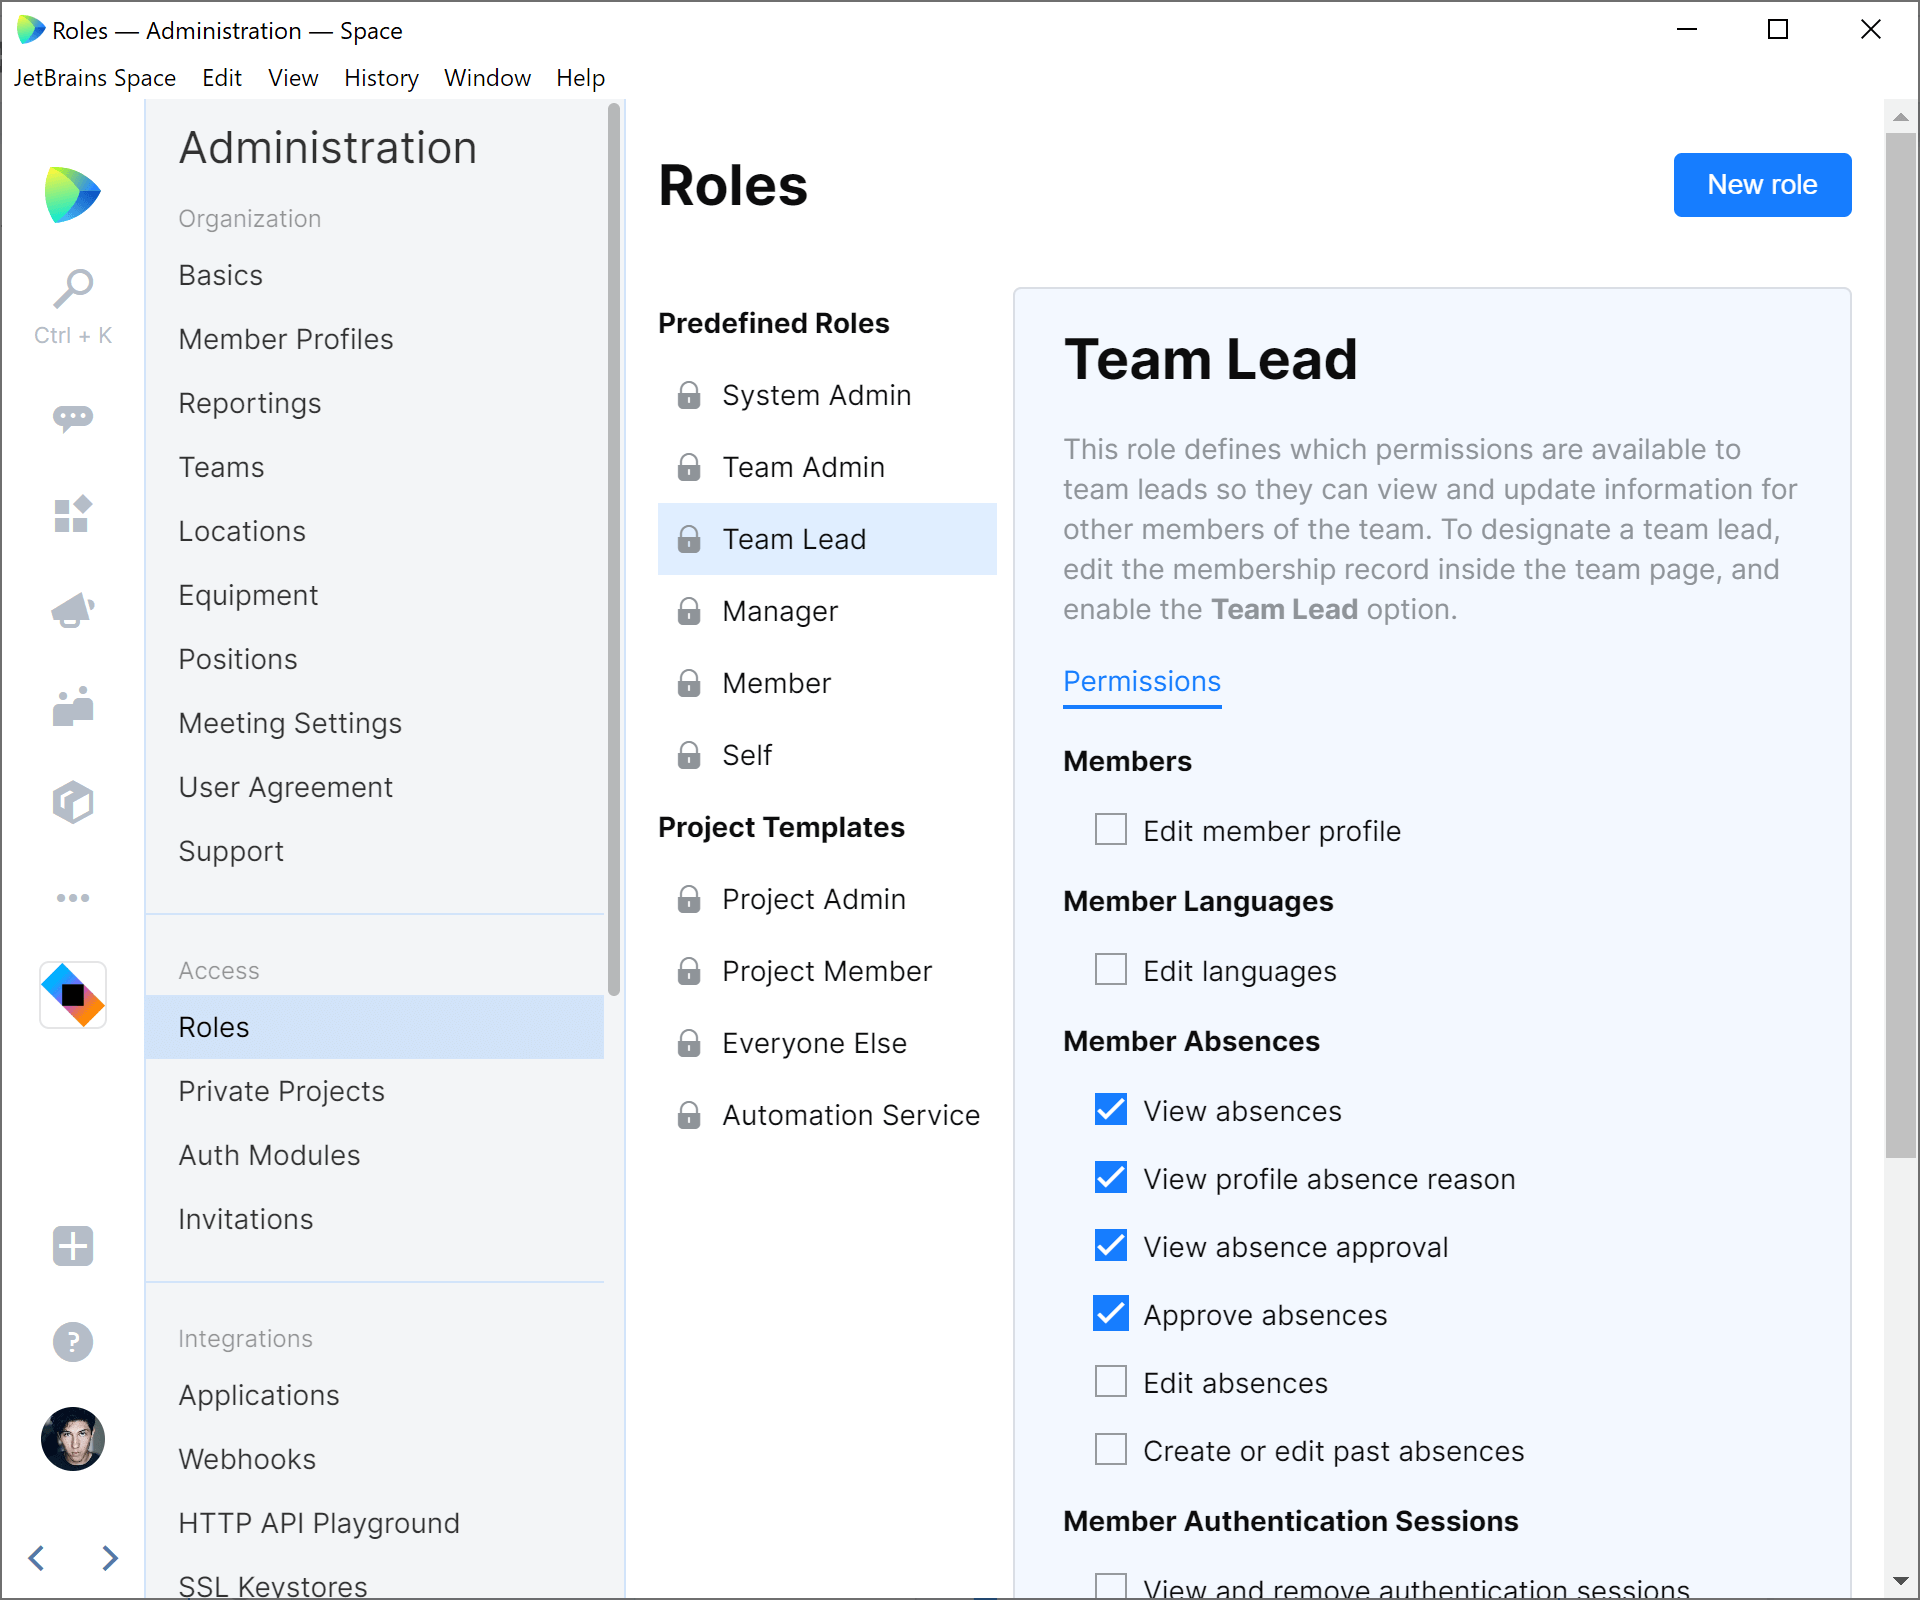 Default permissions for these roles can be configured from the Space administration dashboard.